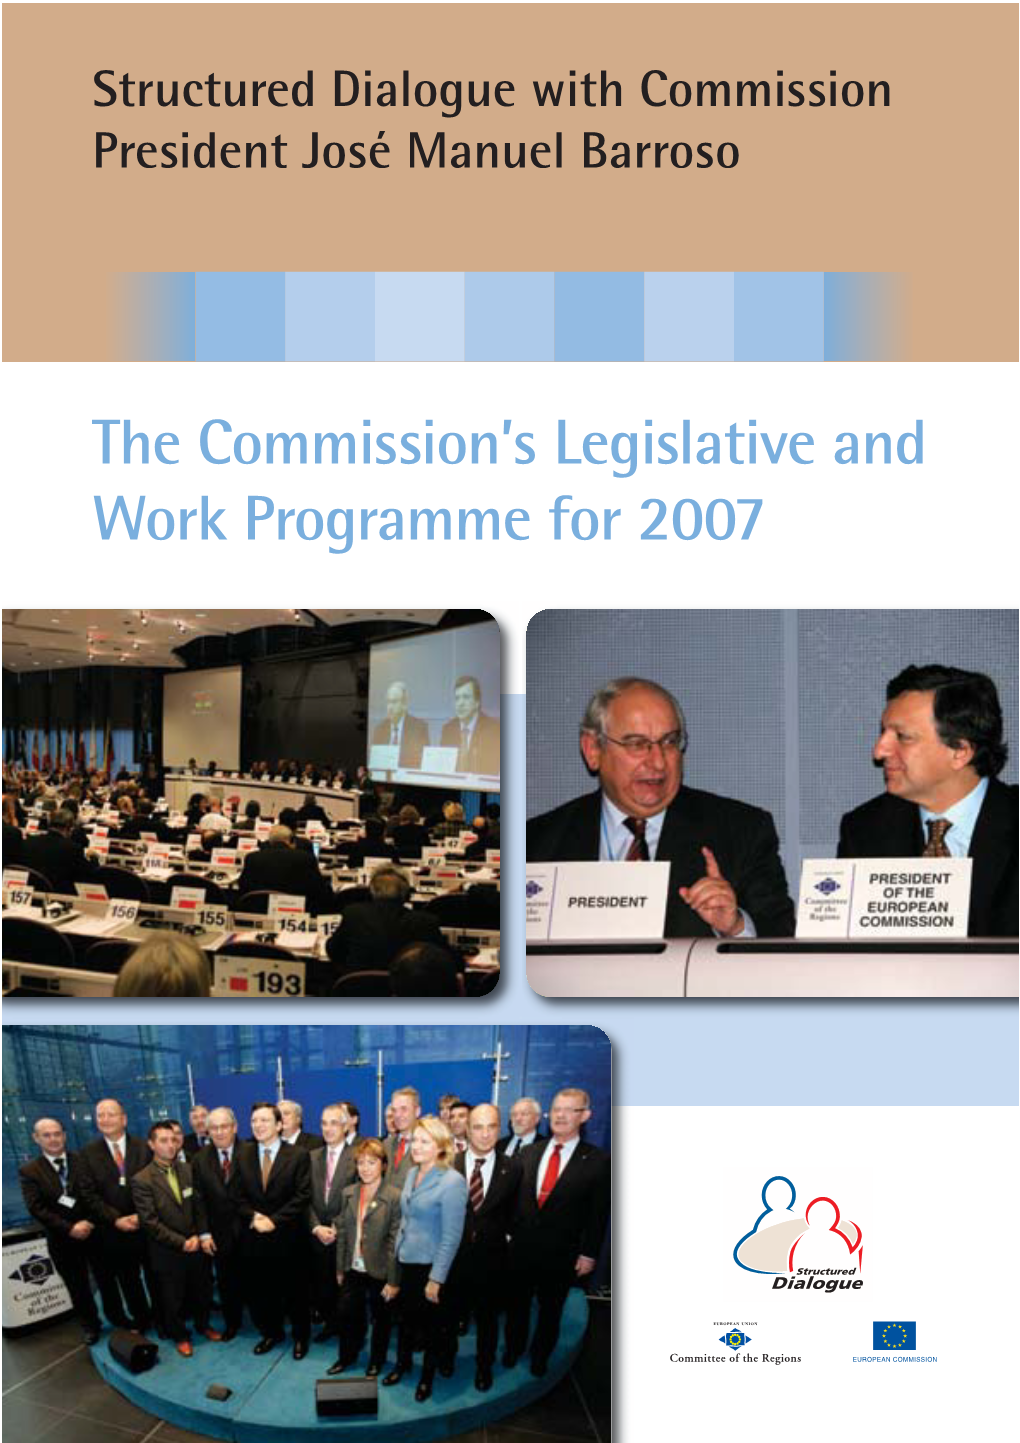 The Commission's Legislative and Work Programme for 2007